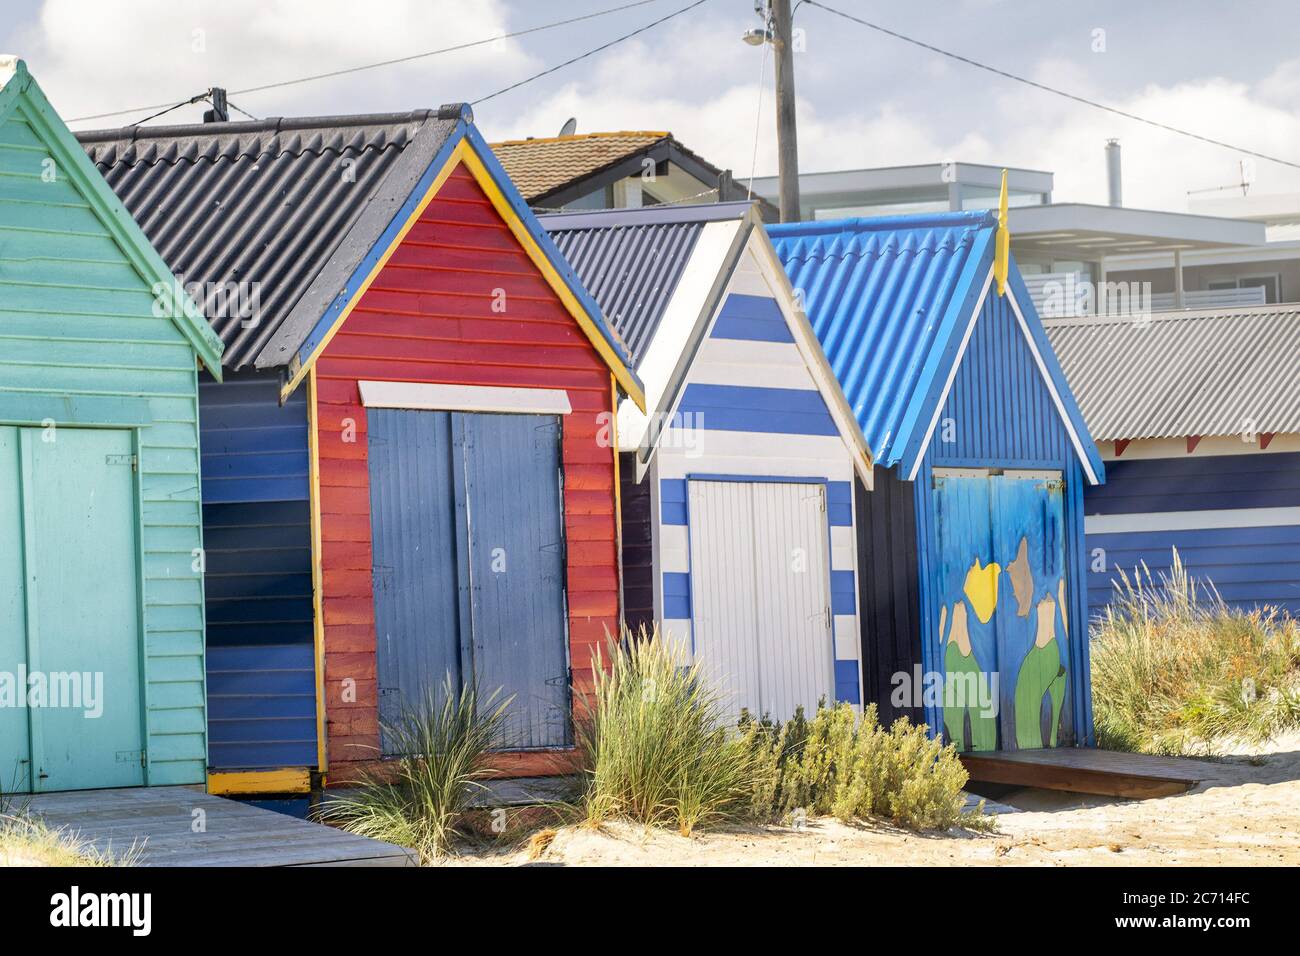 Wooden colorful beach huts on a sunny day. Stock Photo